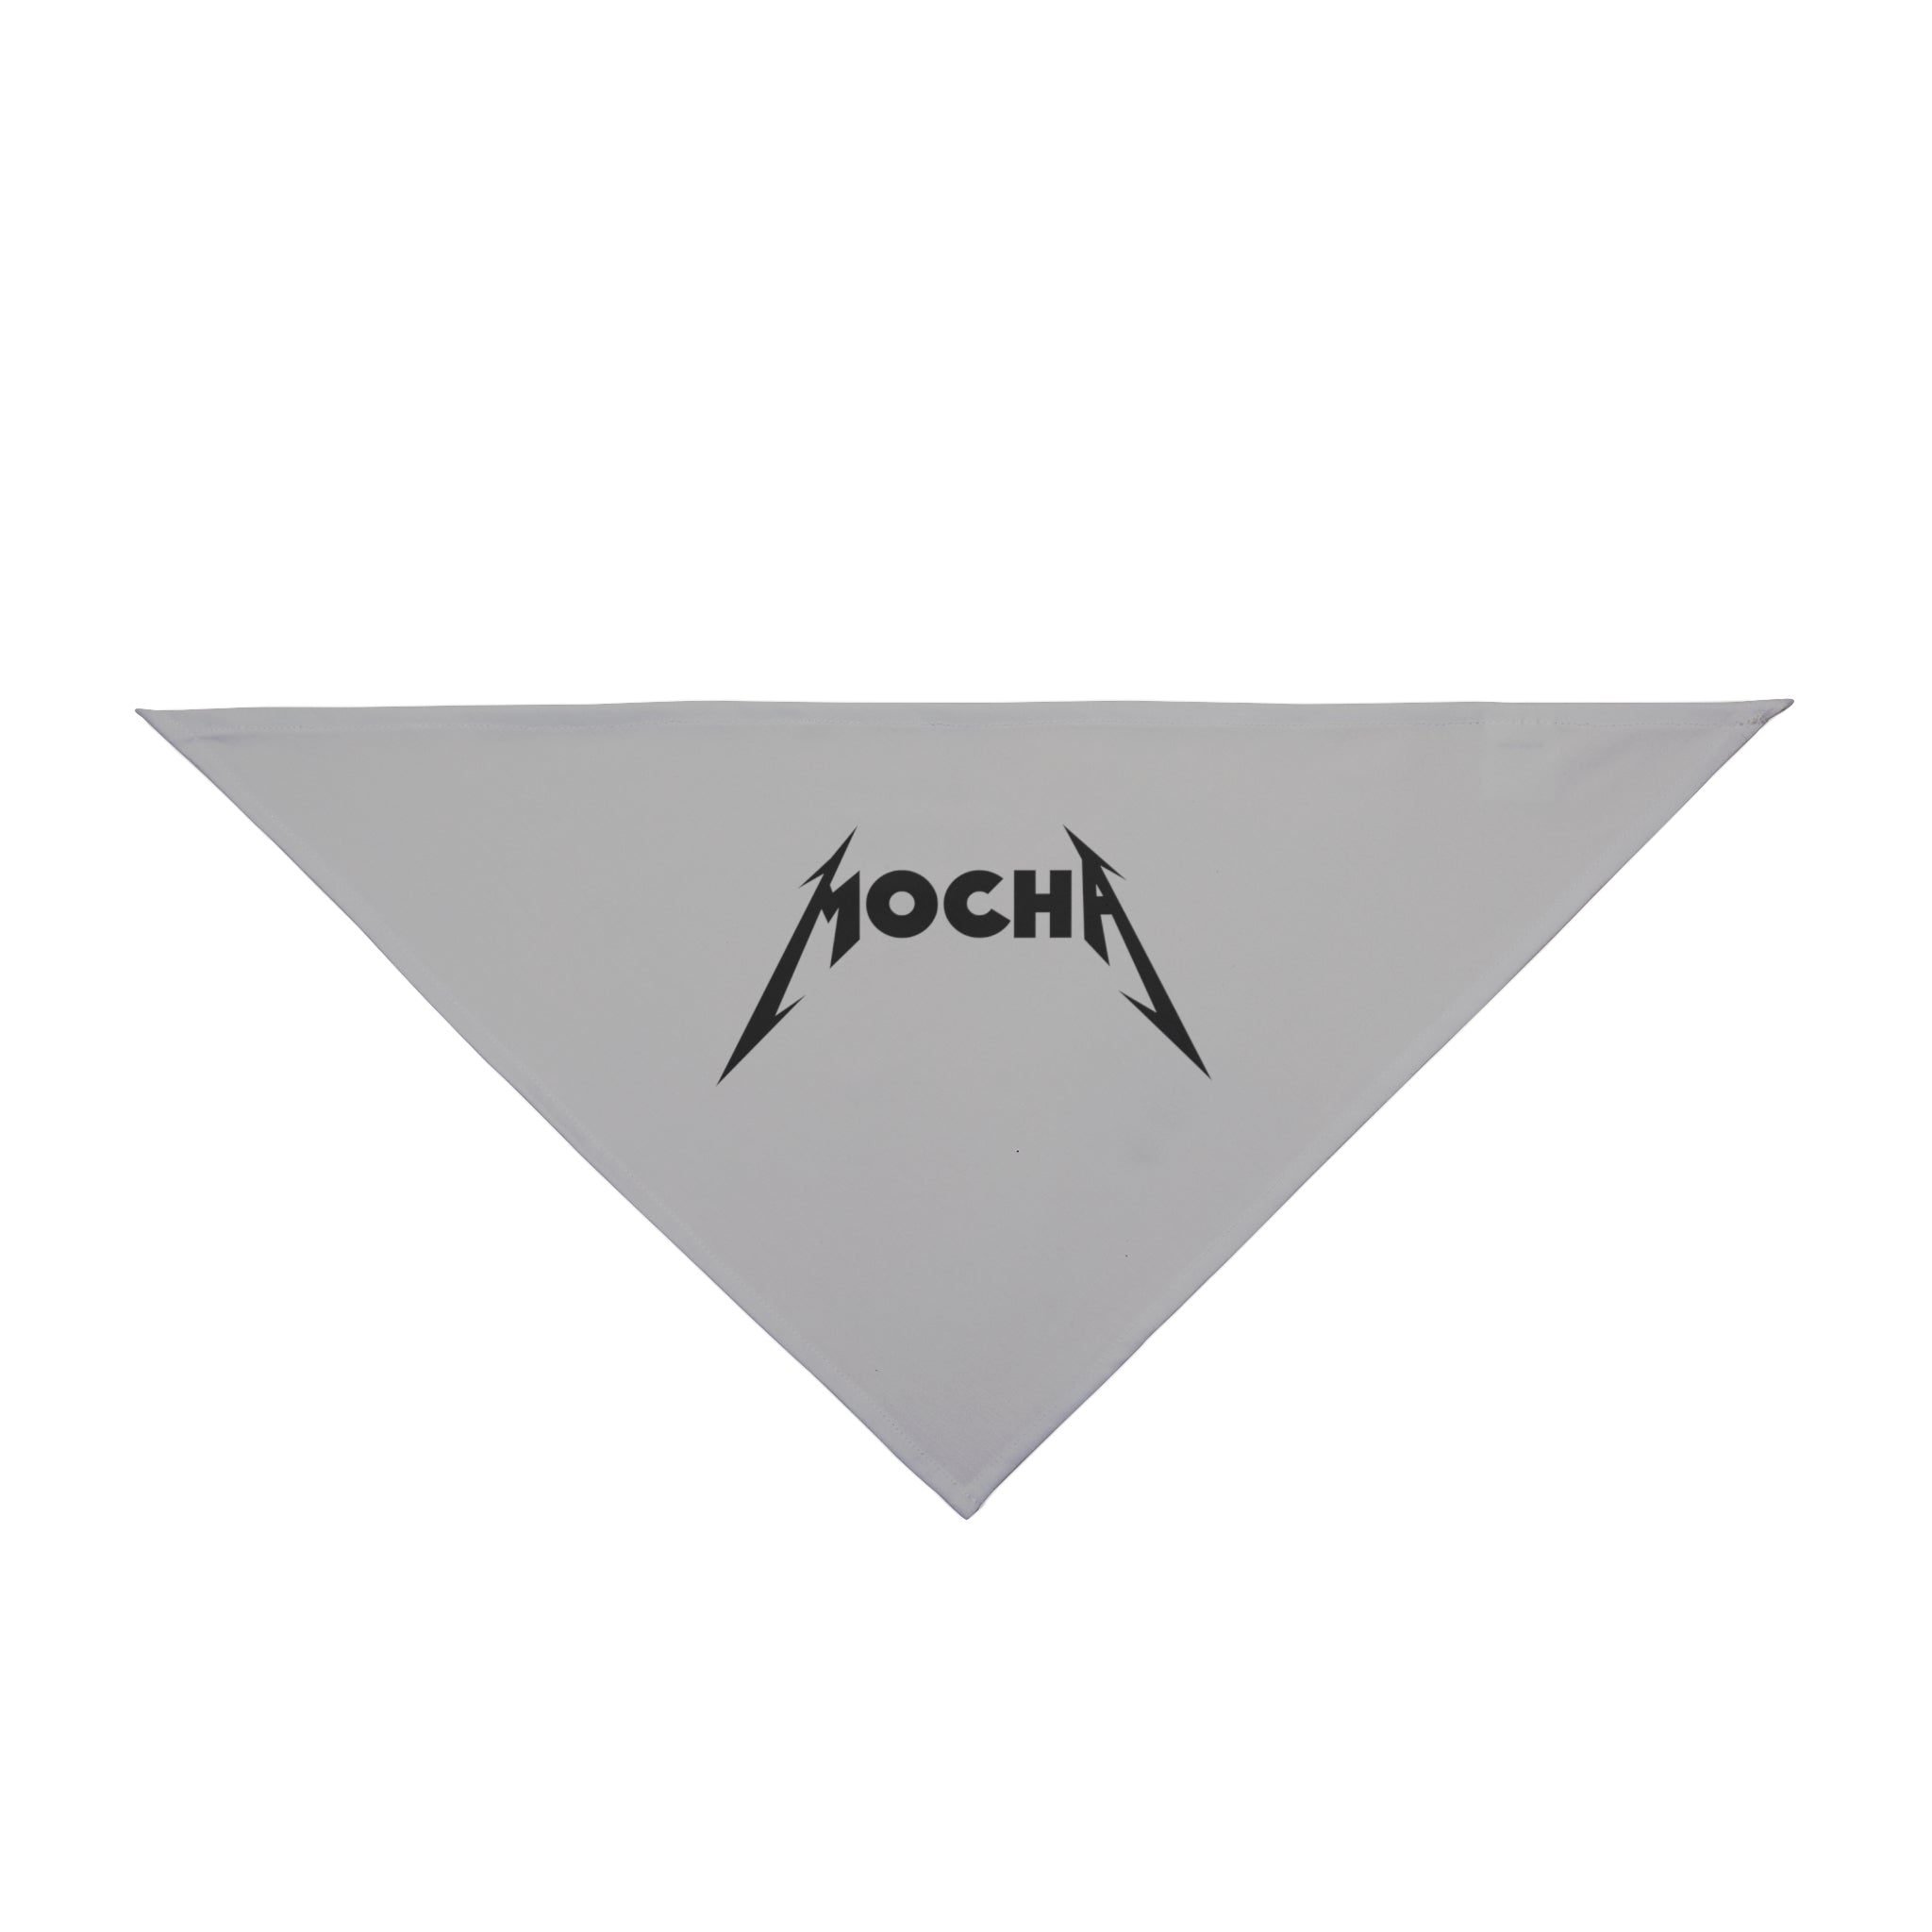 A triangular white Mocha - Pet Bandana design made from soft-spun polyester, featuring the word "MOCHA" printed in black at the center with sharp edges reminiscent of a heavy metal band logo, perfect as a pet accessory.